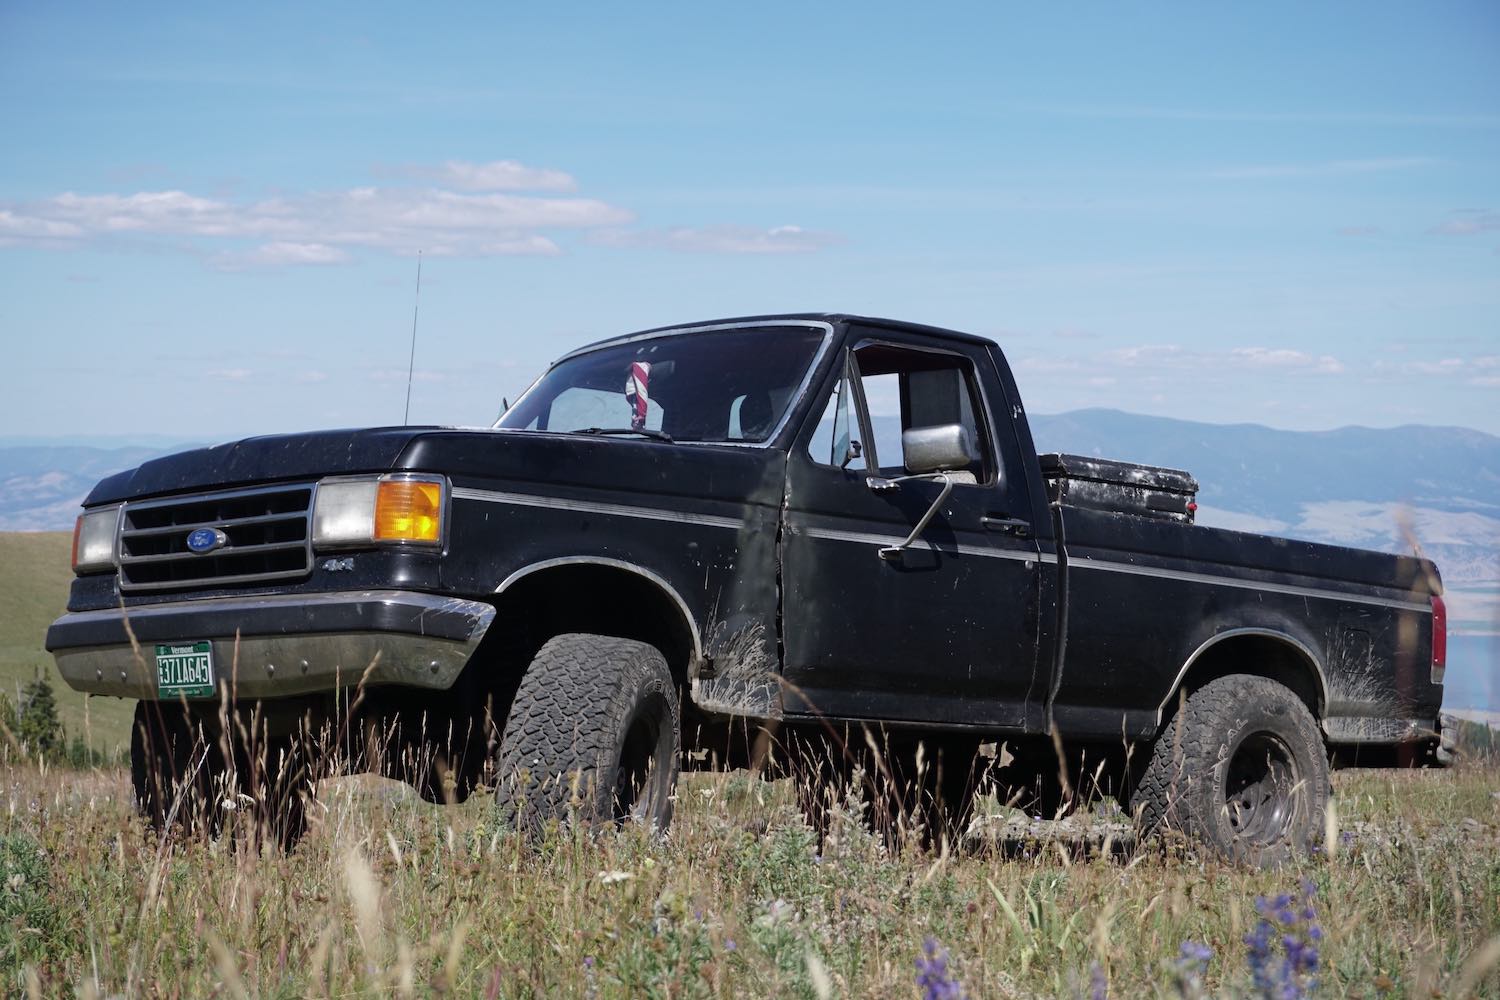 Black square body Ford F-150 classic pickup truck parked in a field, blue sky visible in the background.